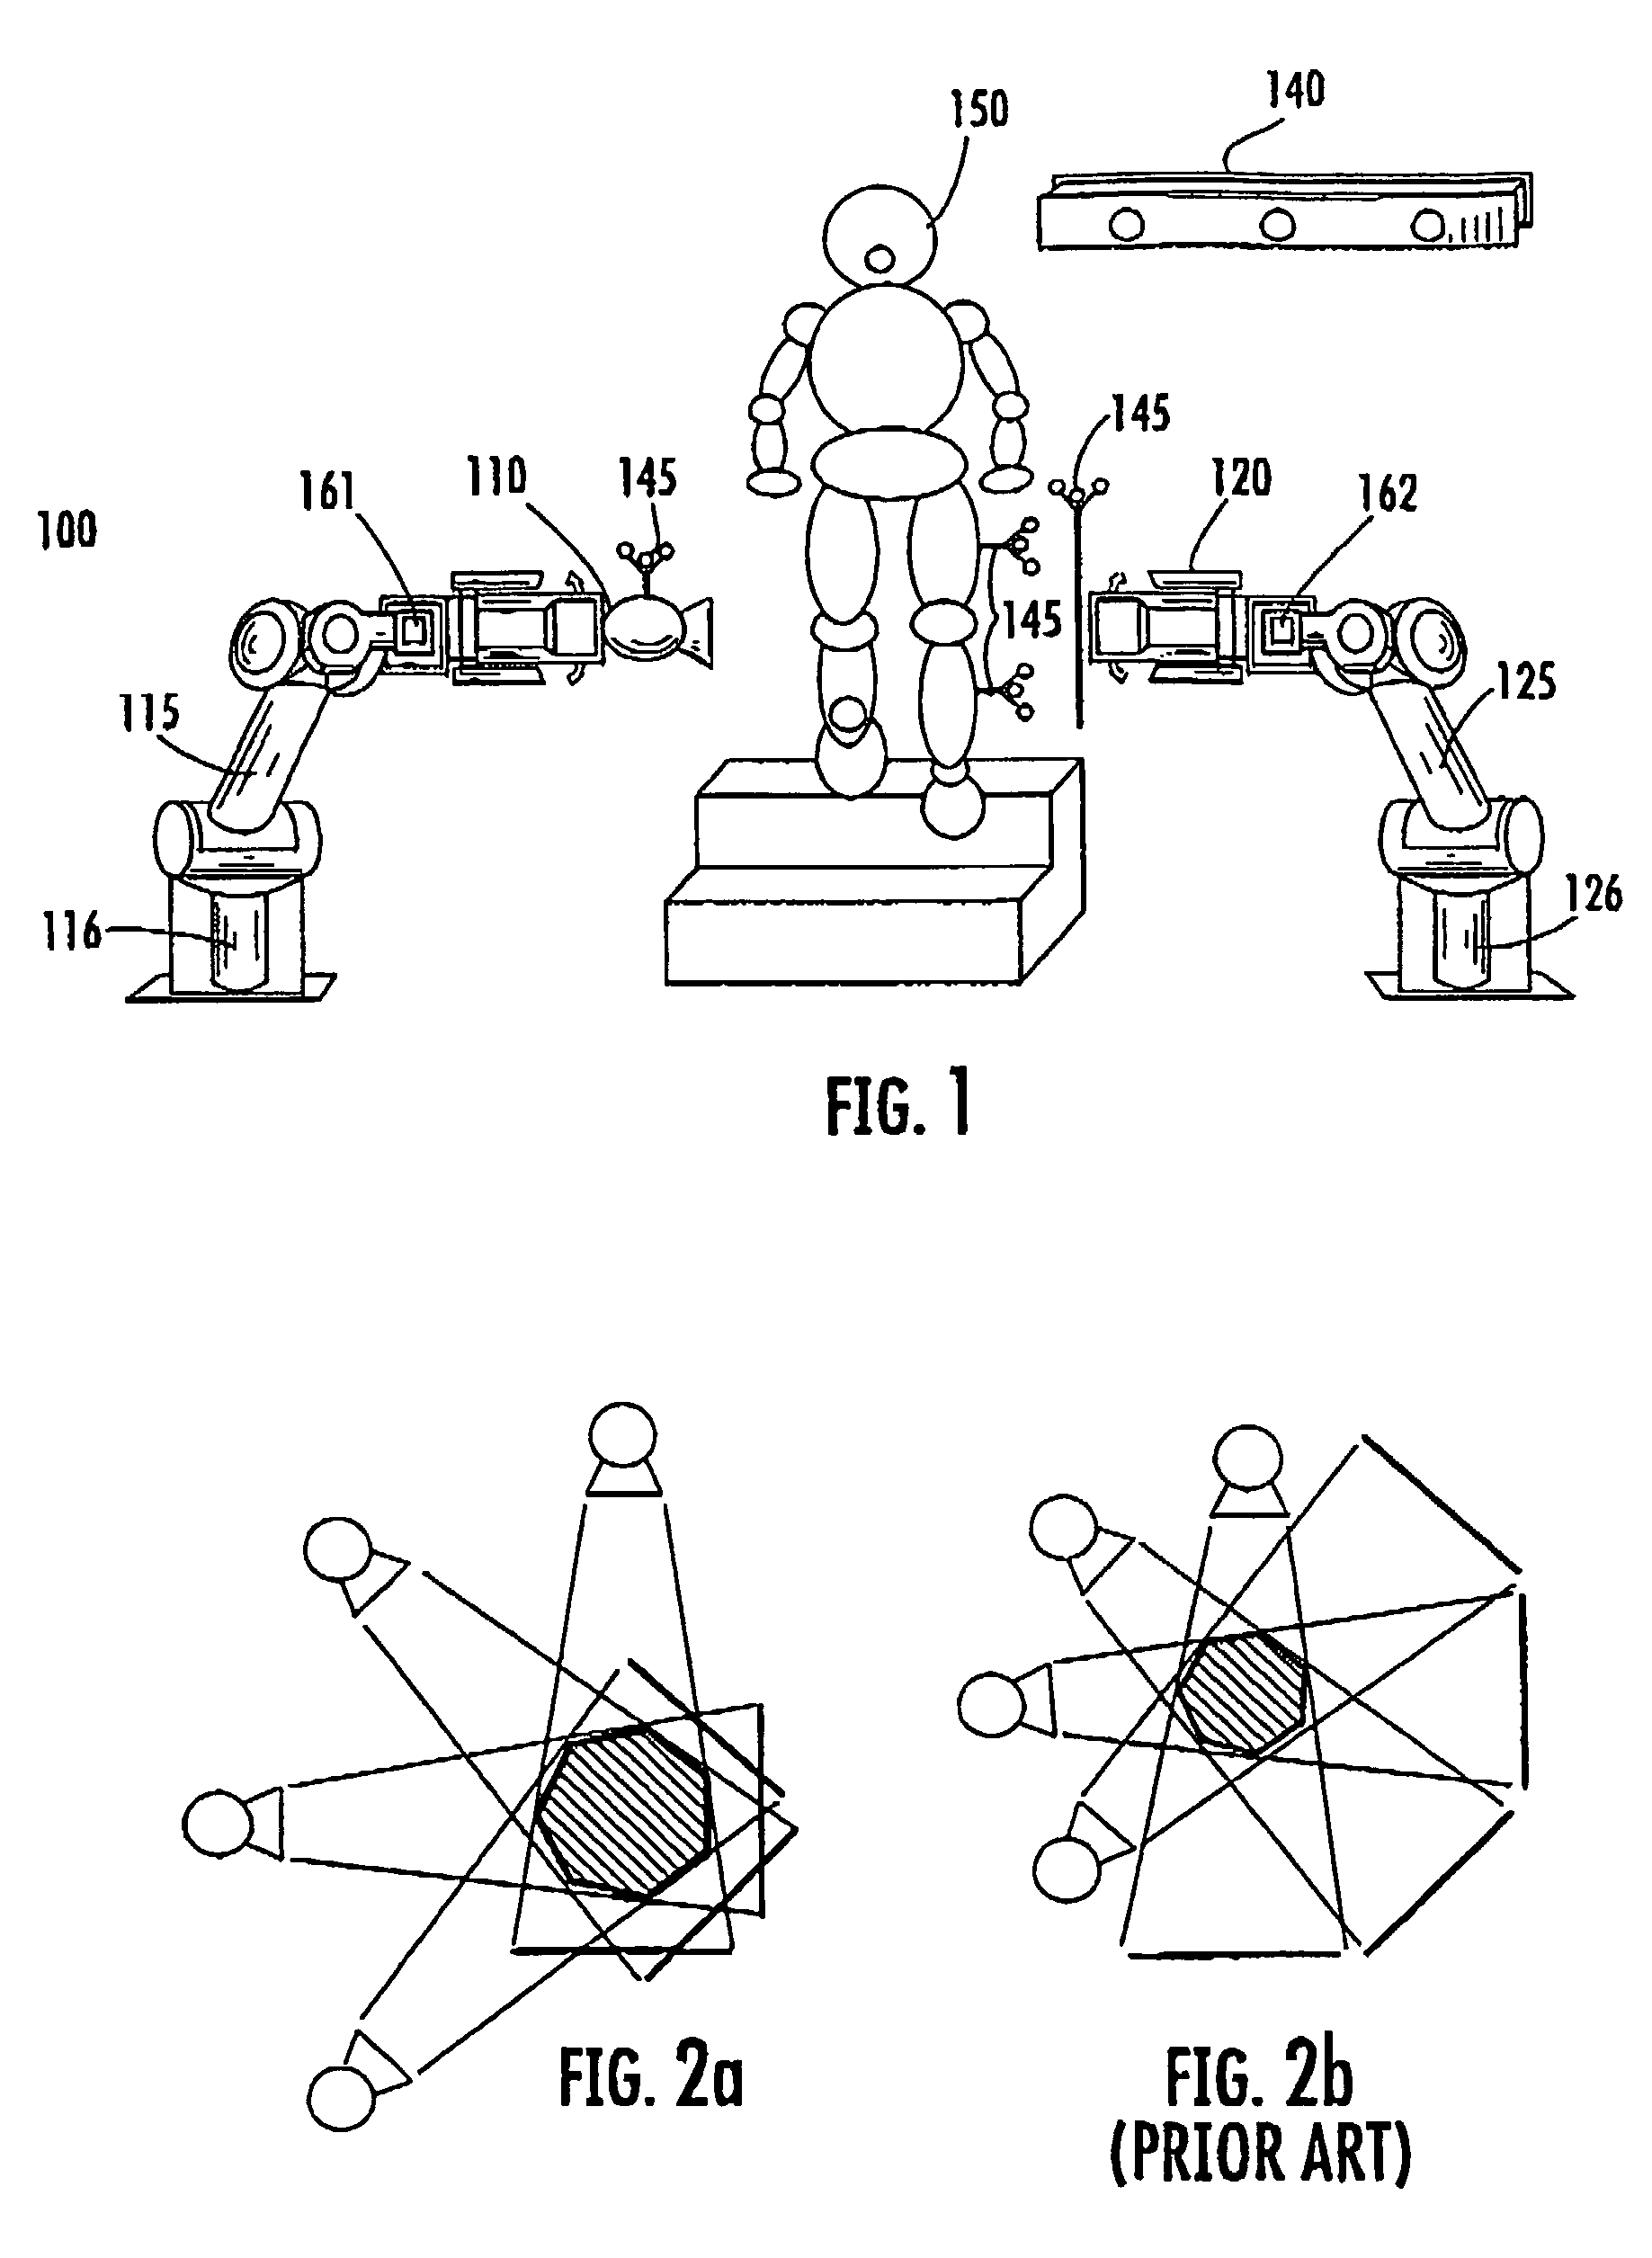 Radiographic medical imaging system using robot mounted source and sensor for dynamic image capture and tomography